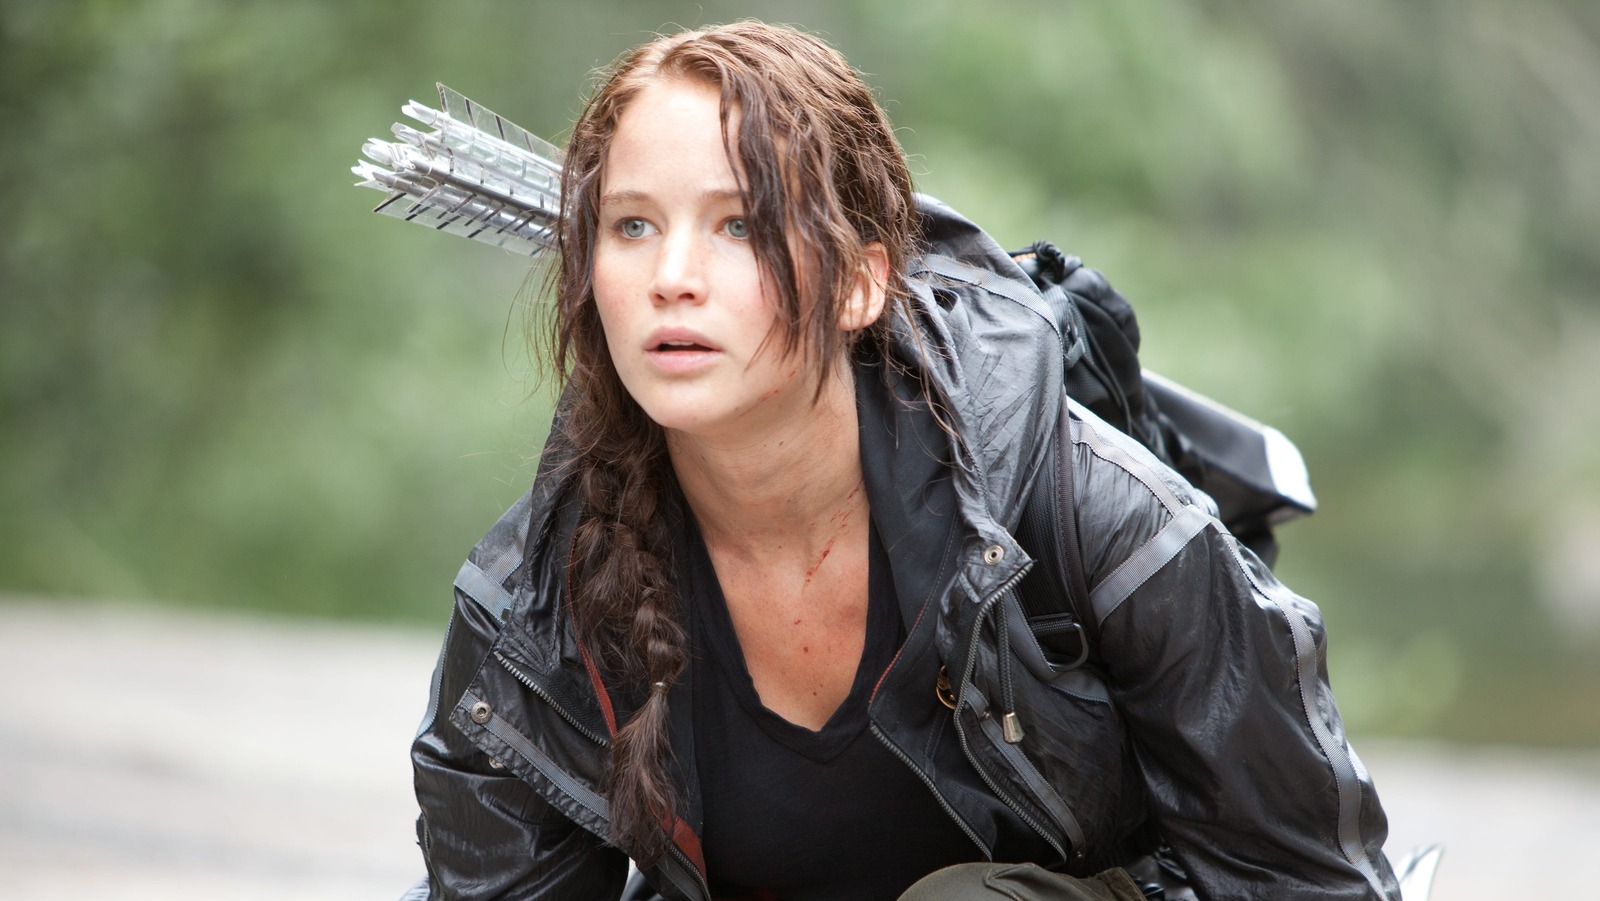 Does Katniss suffer from PTSD